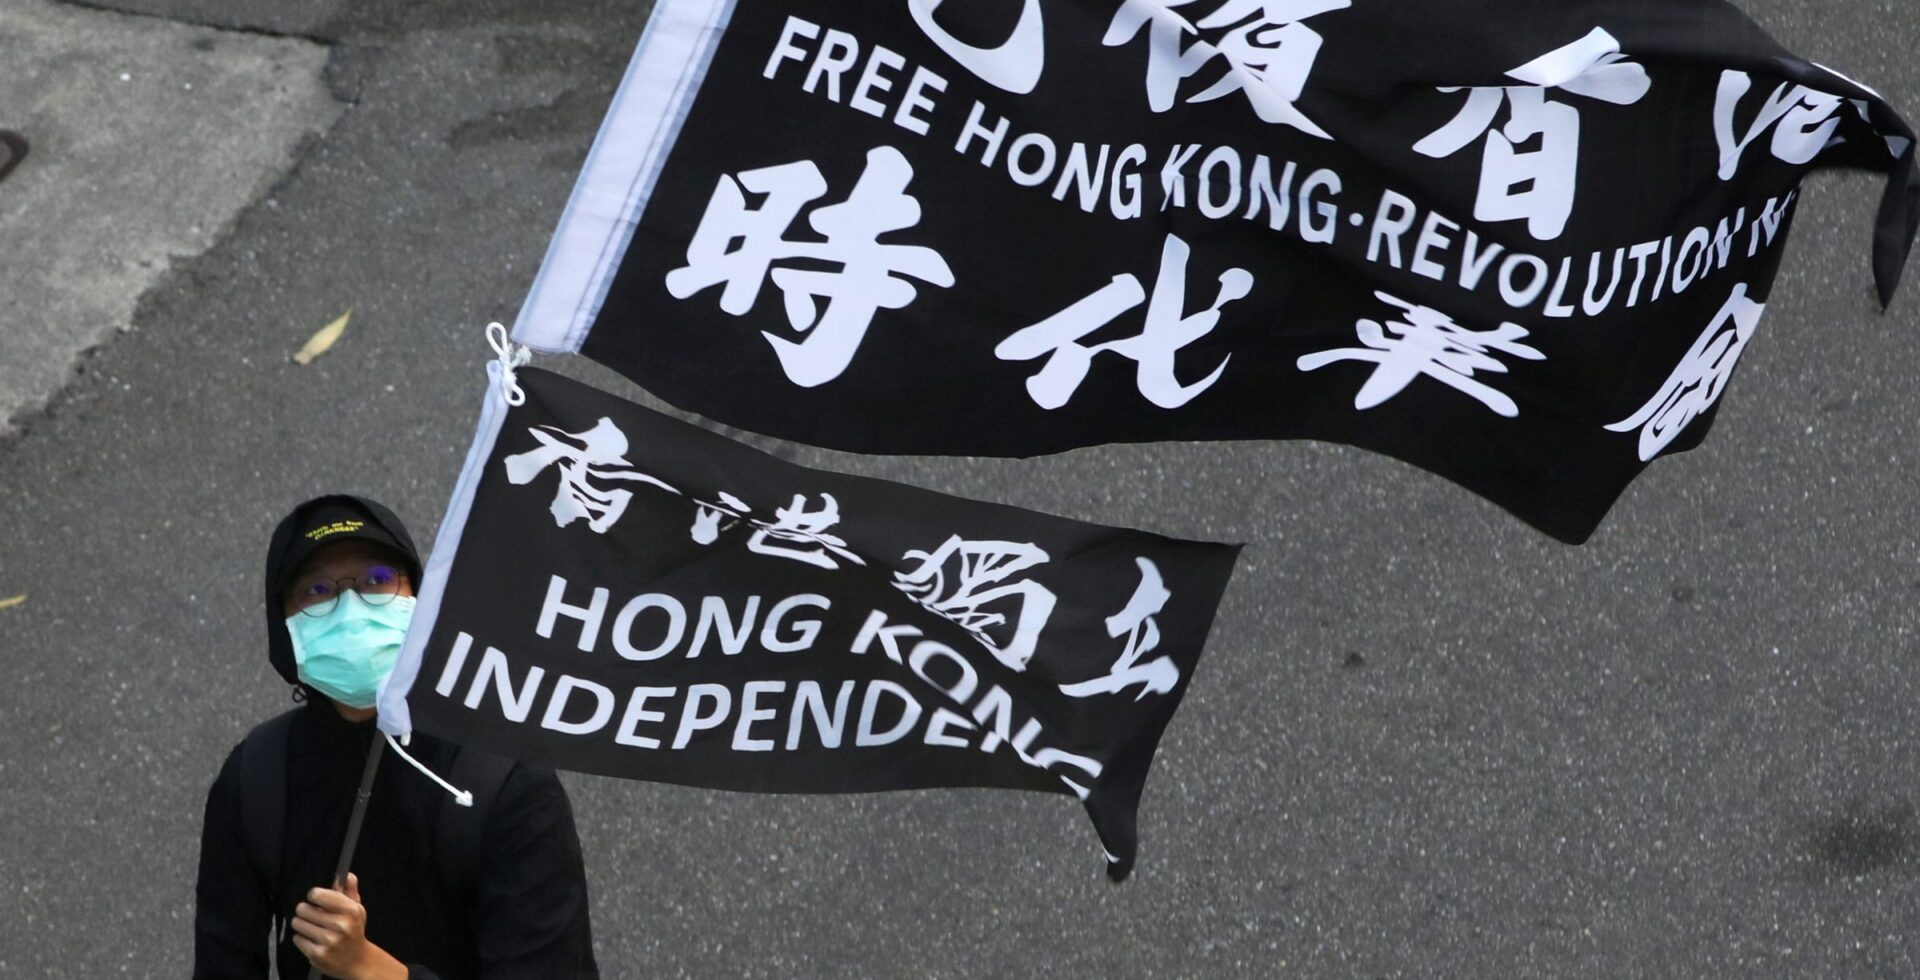 A protester holds a 'Free Hong Kong revolution' flag during a rally in Taipei, Taiwan.